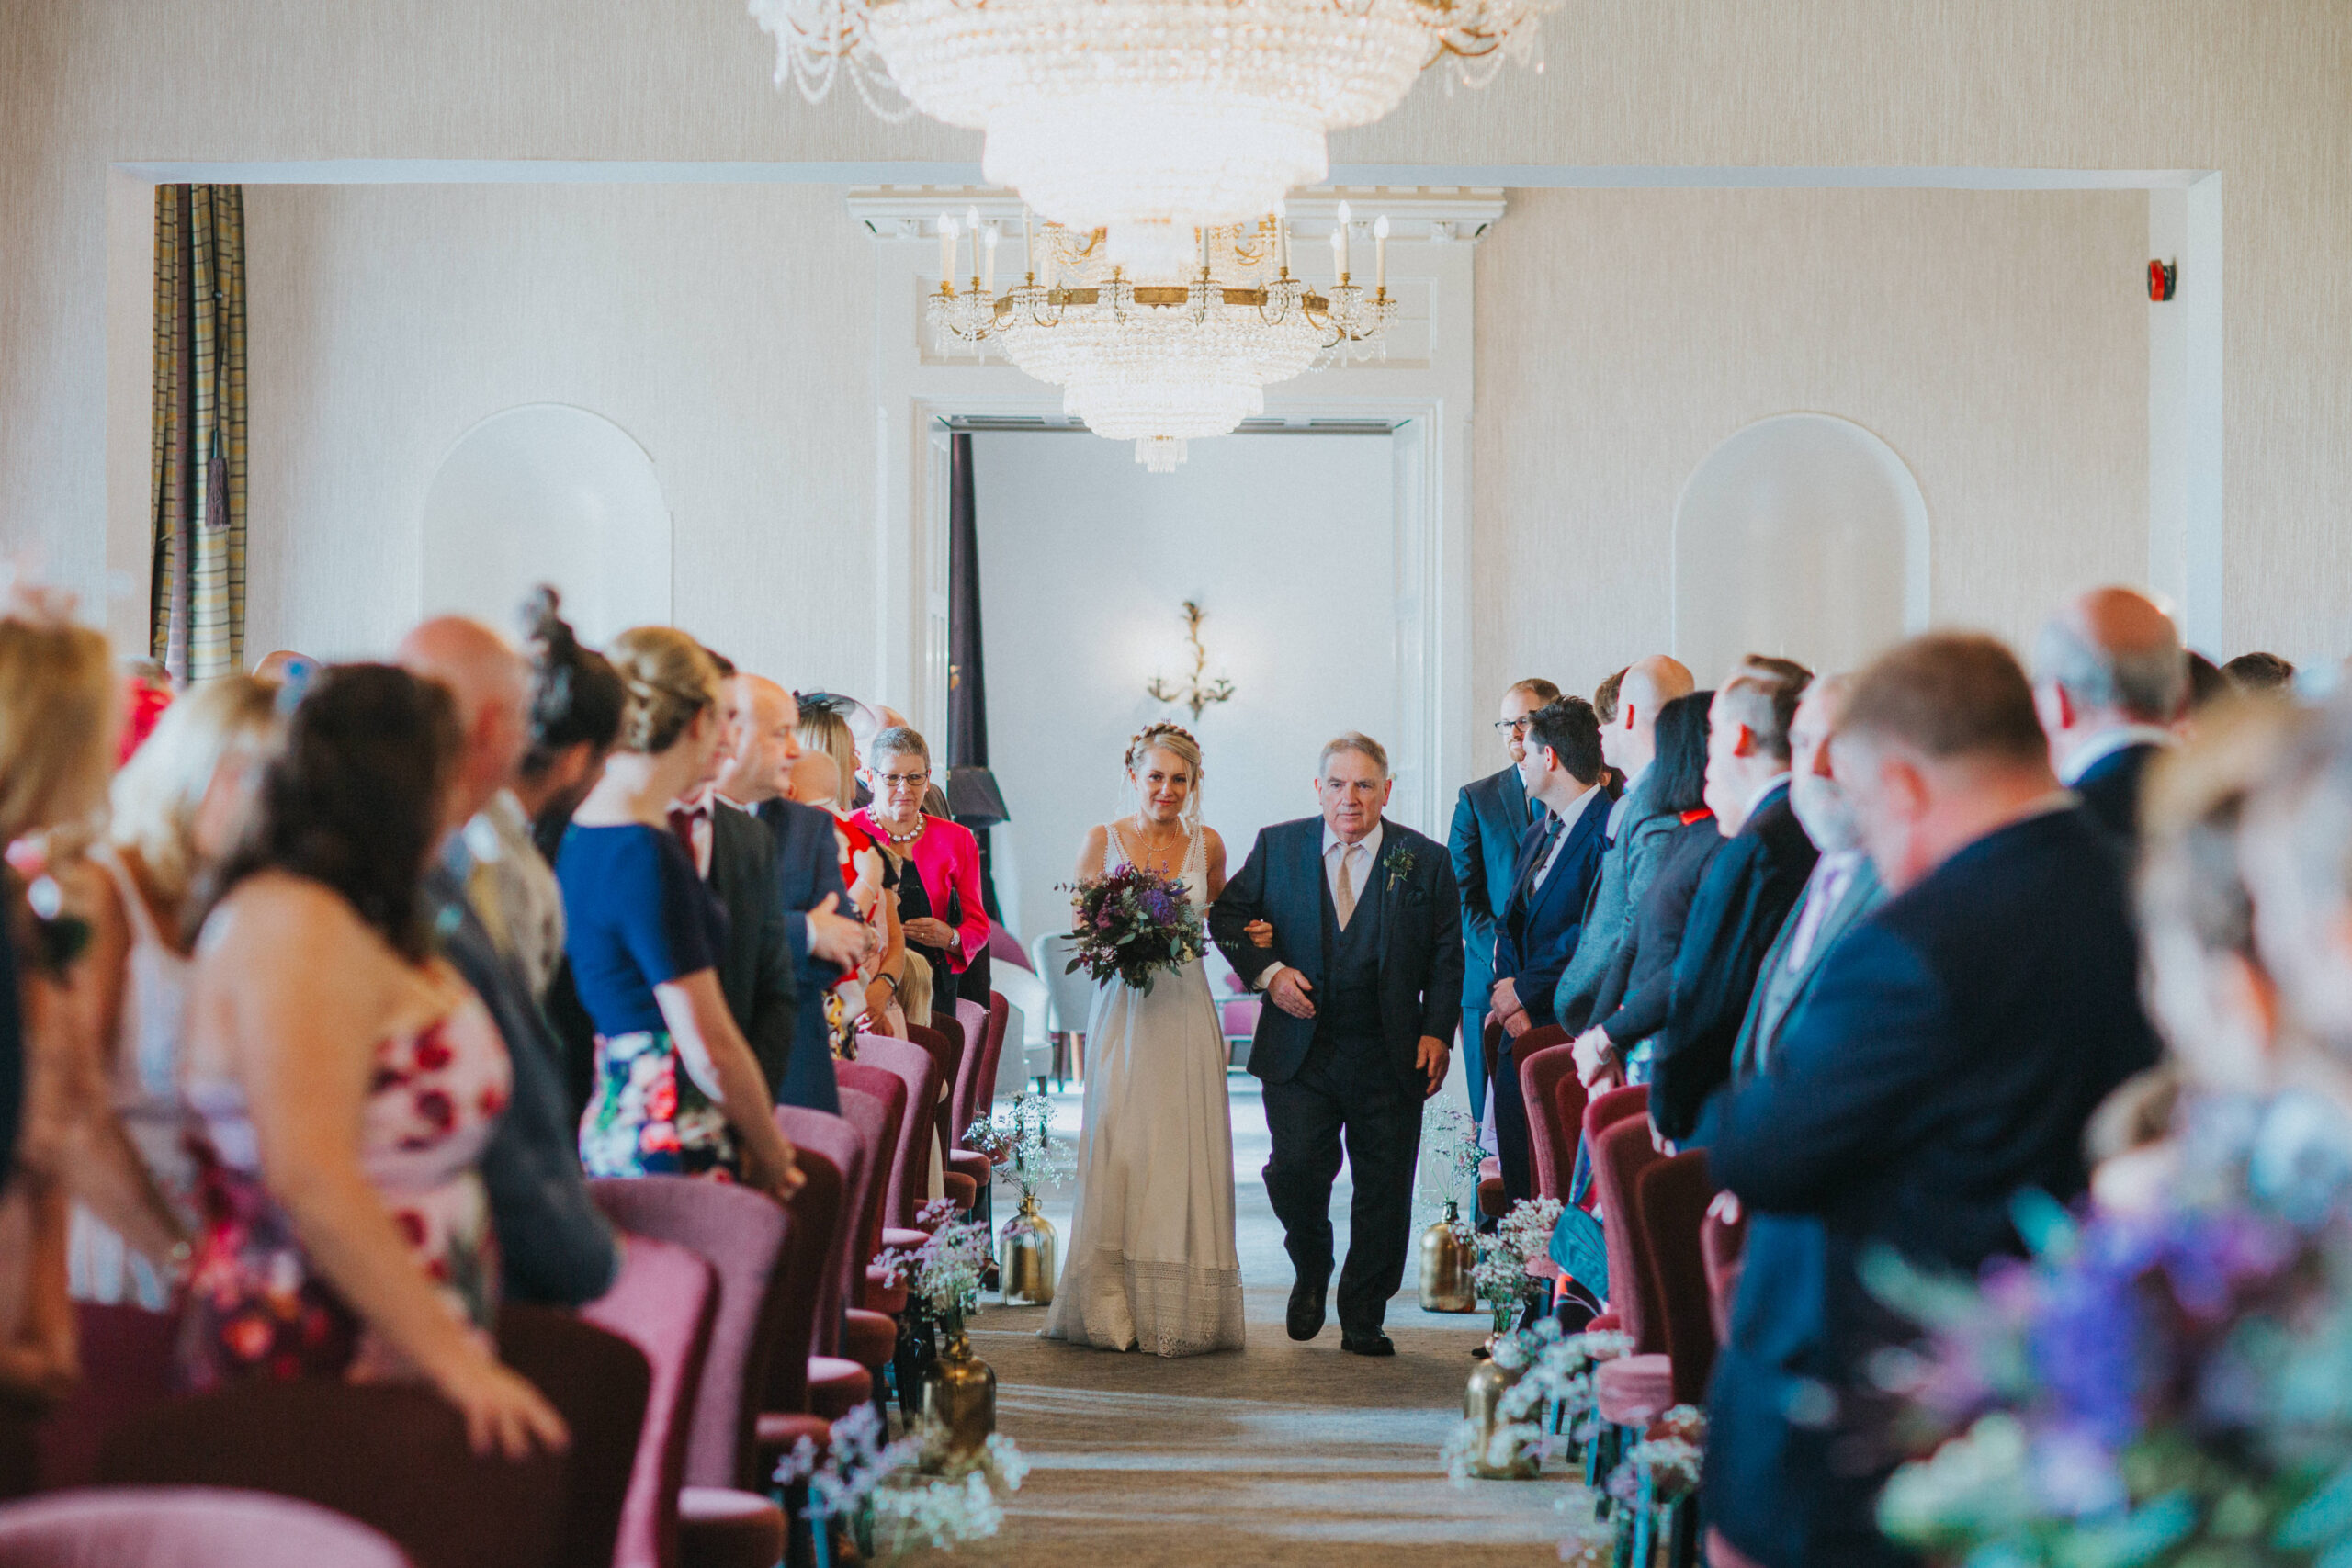 Personalized humanist vows exchanged at Walton Hall